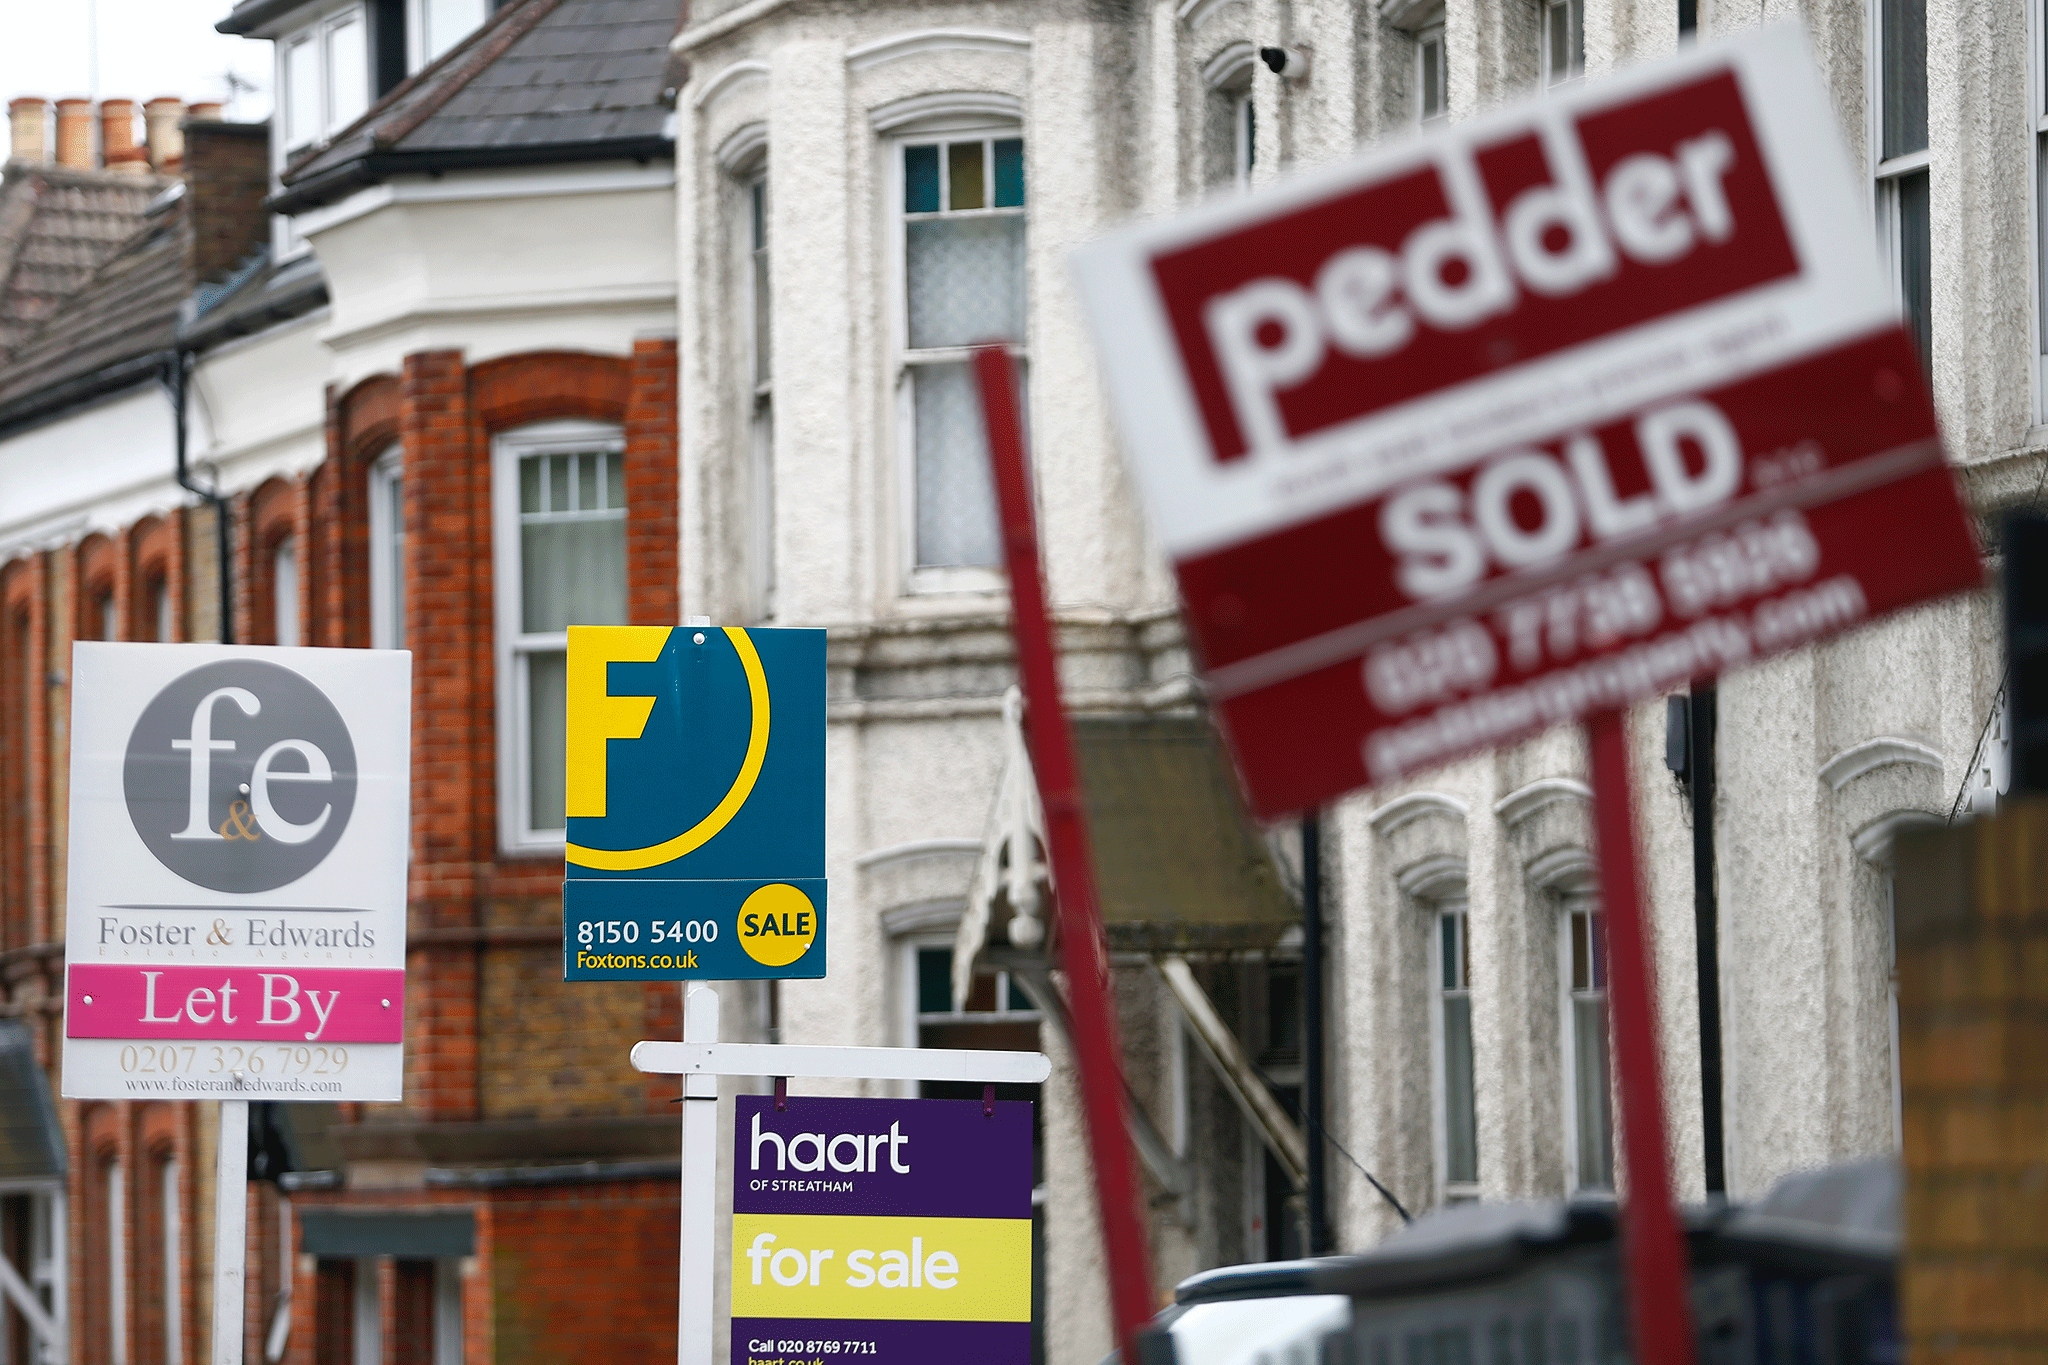 Adults returning to ‘Bank of Mum and Dad’ to help them buy second home